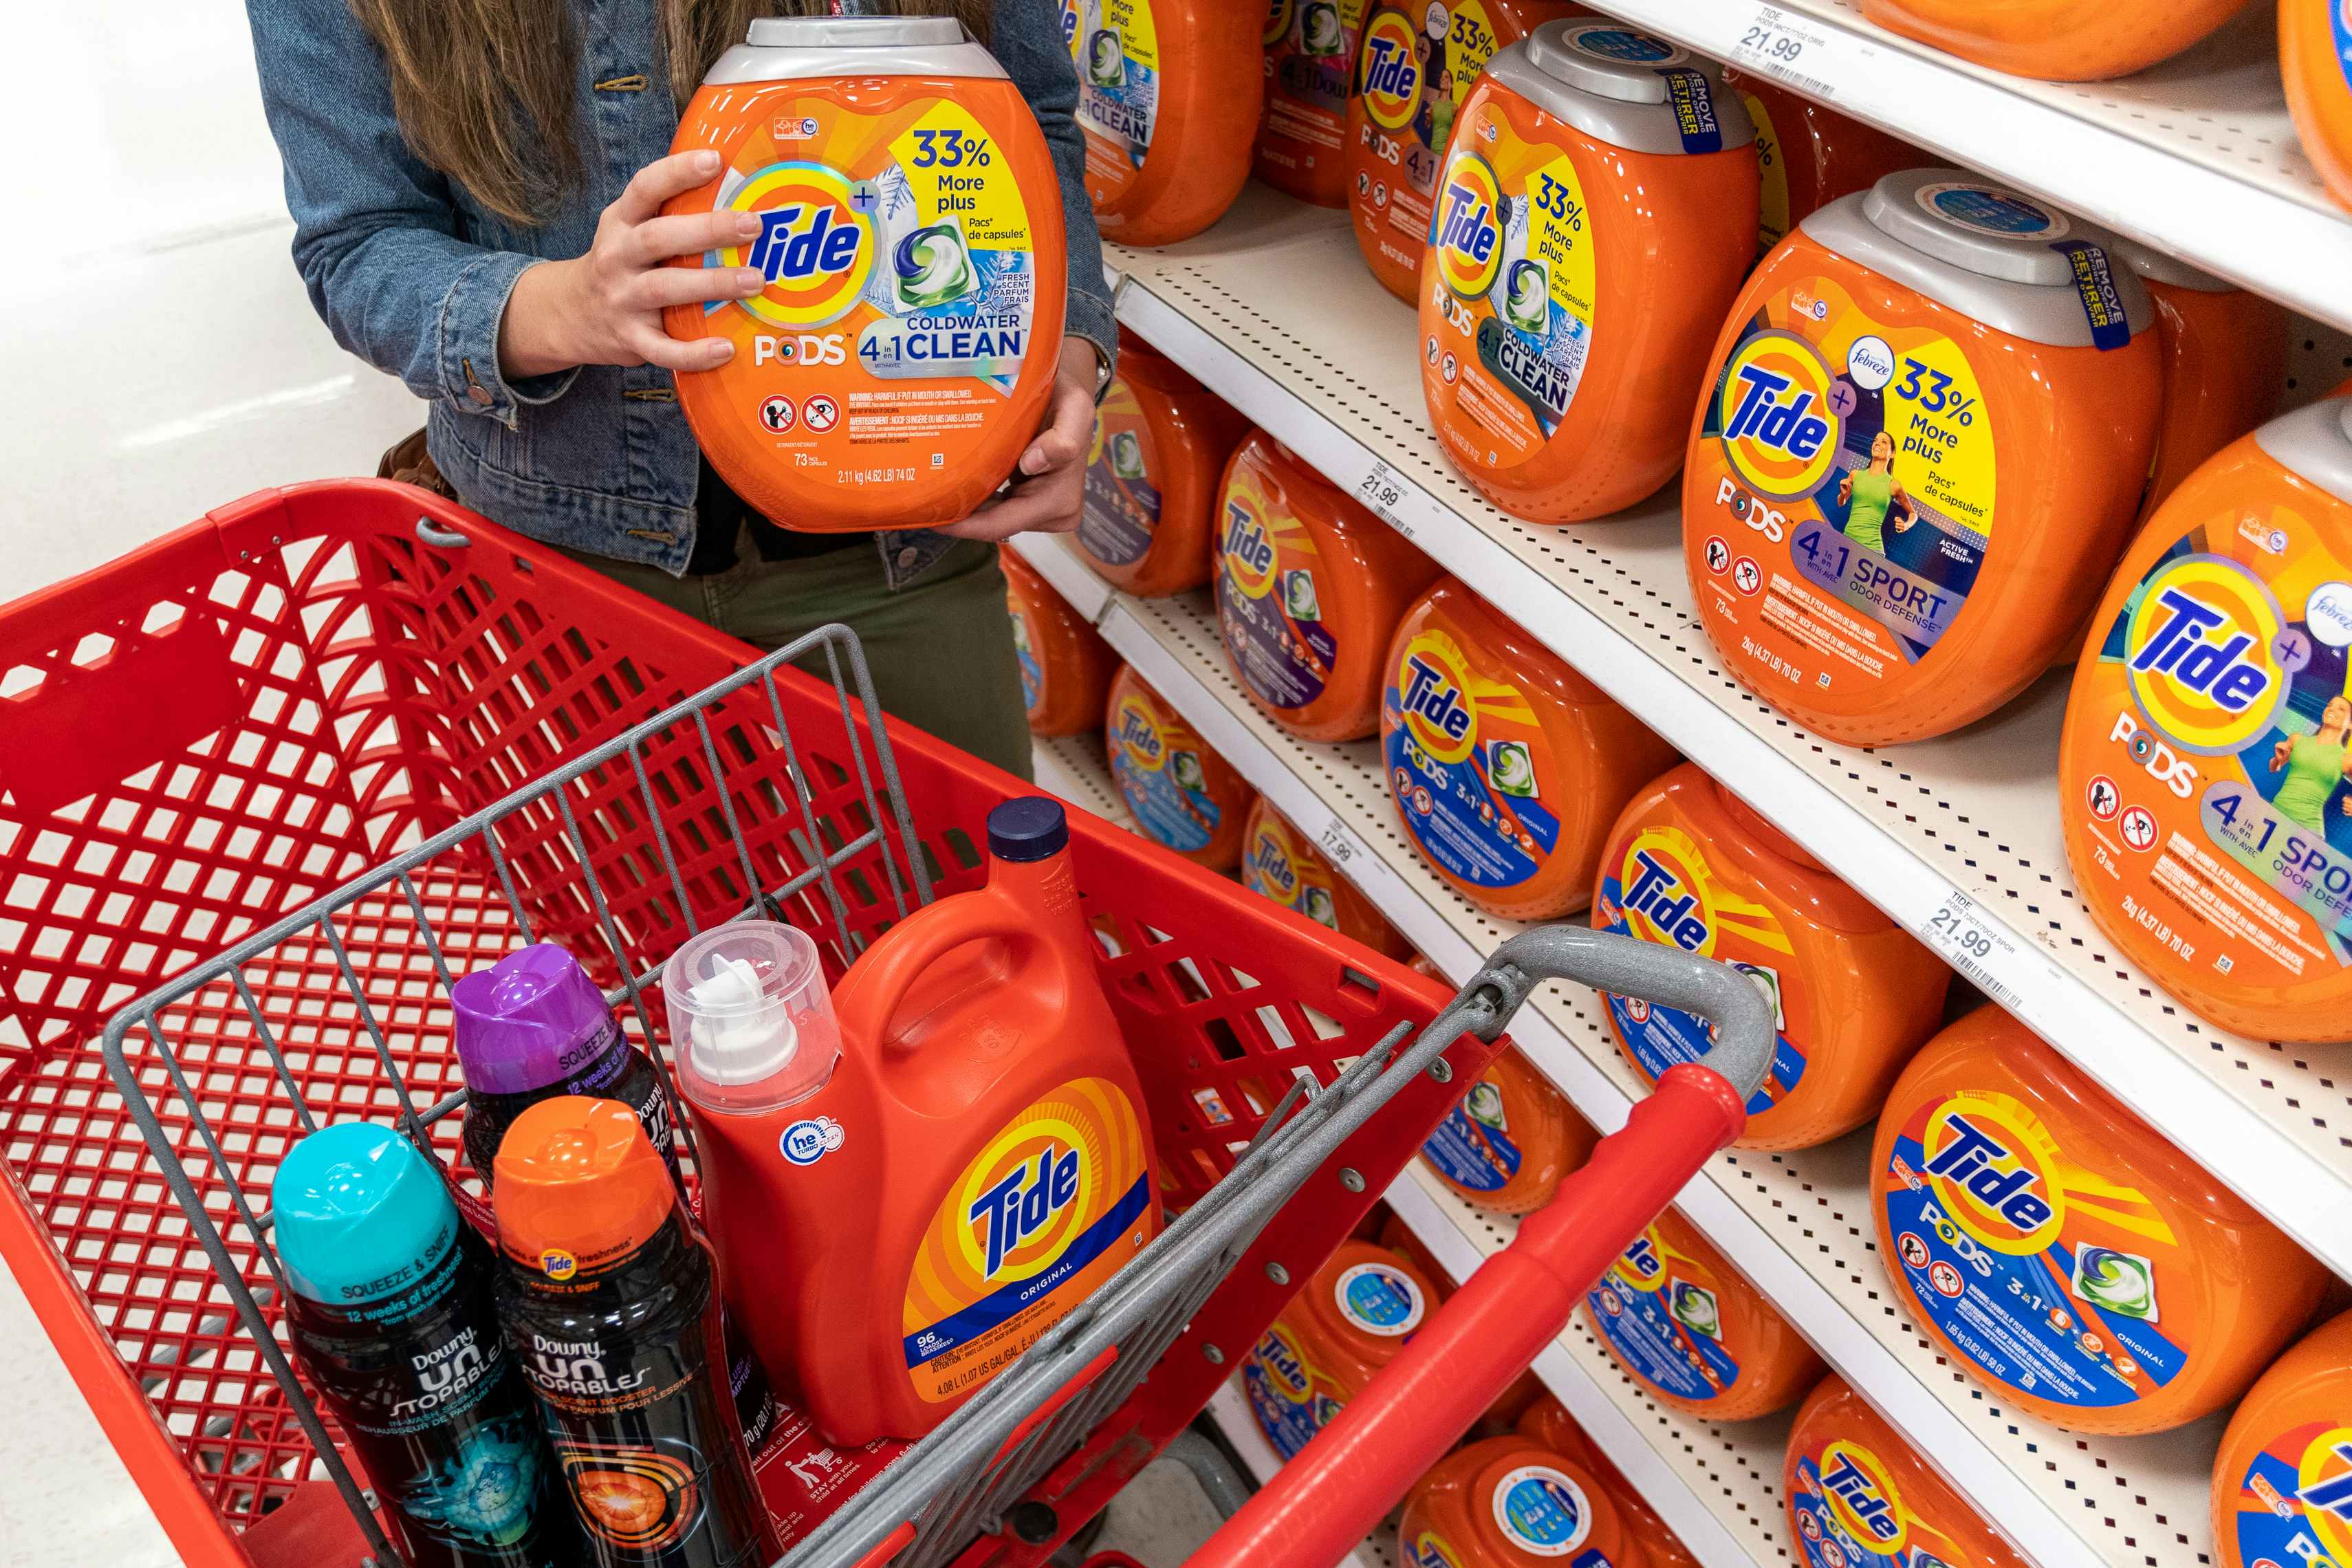 A woman standing behind a red Target shopping cart, holding a container of tide pods, with other laundry products in the basket.